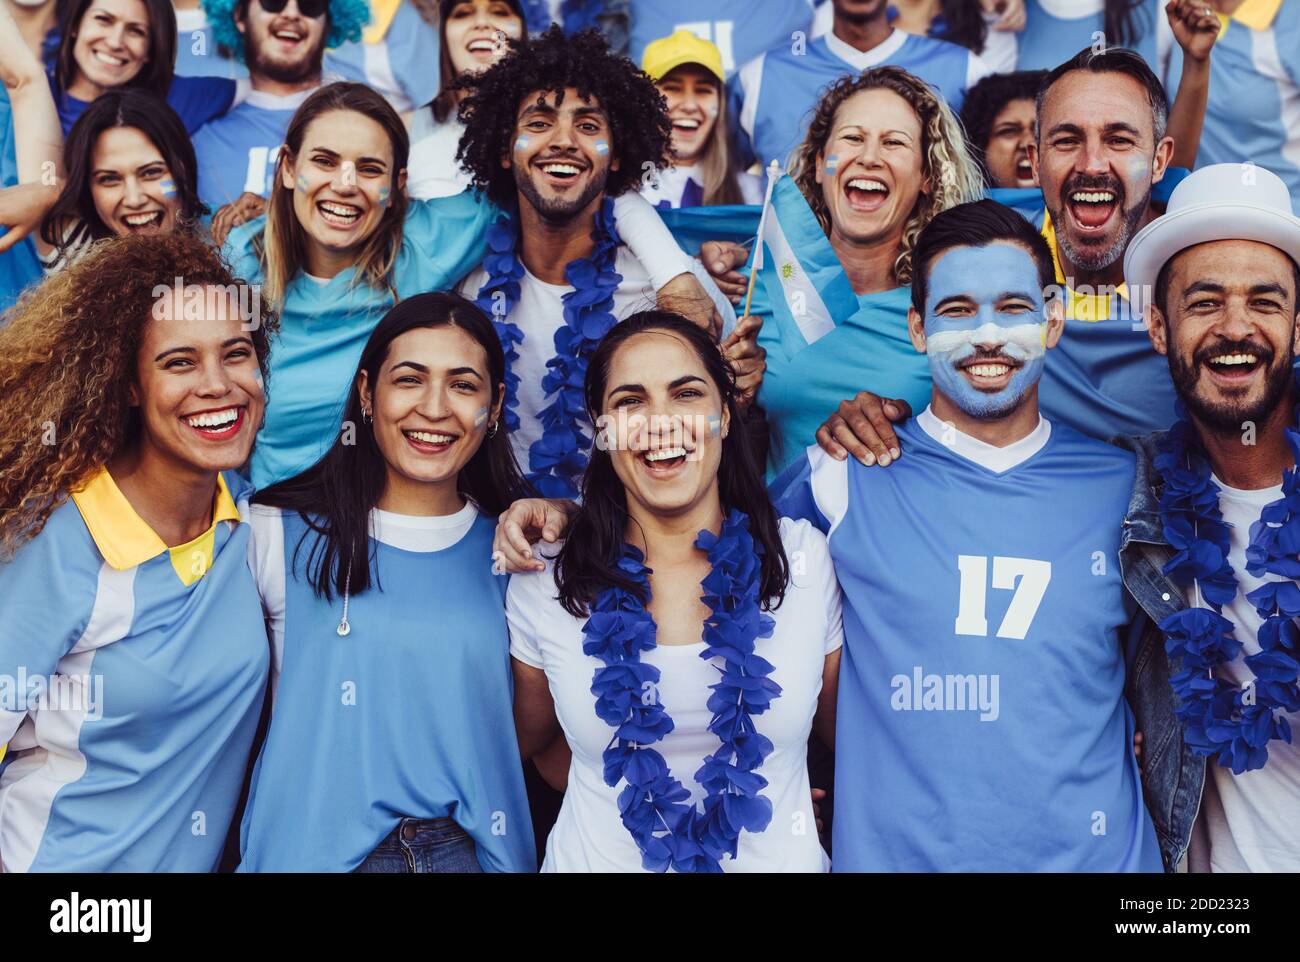 group-of-spectators-in-stadium-cheering-their-argentina-soccer-team-people-from-argentina-in-fan-zone-supporting-their-soccer-team-2DD2323.jpg